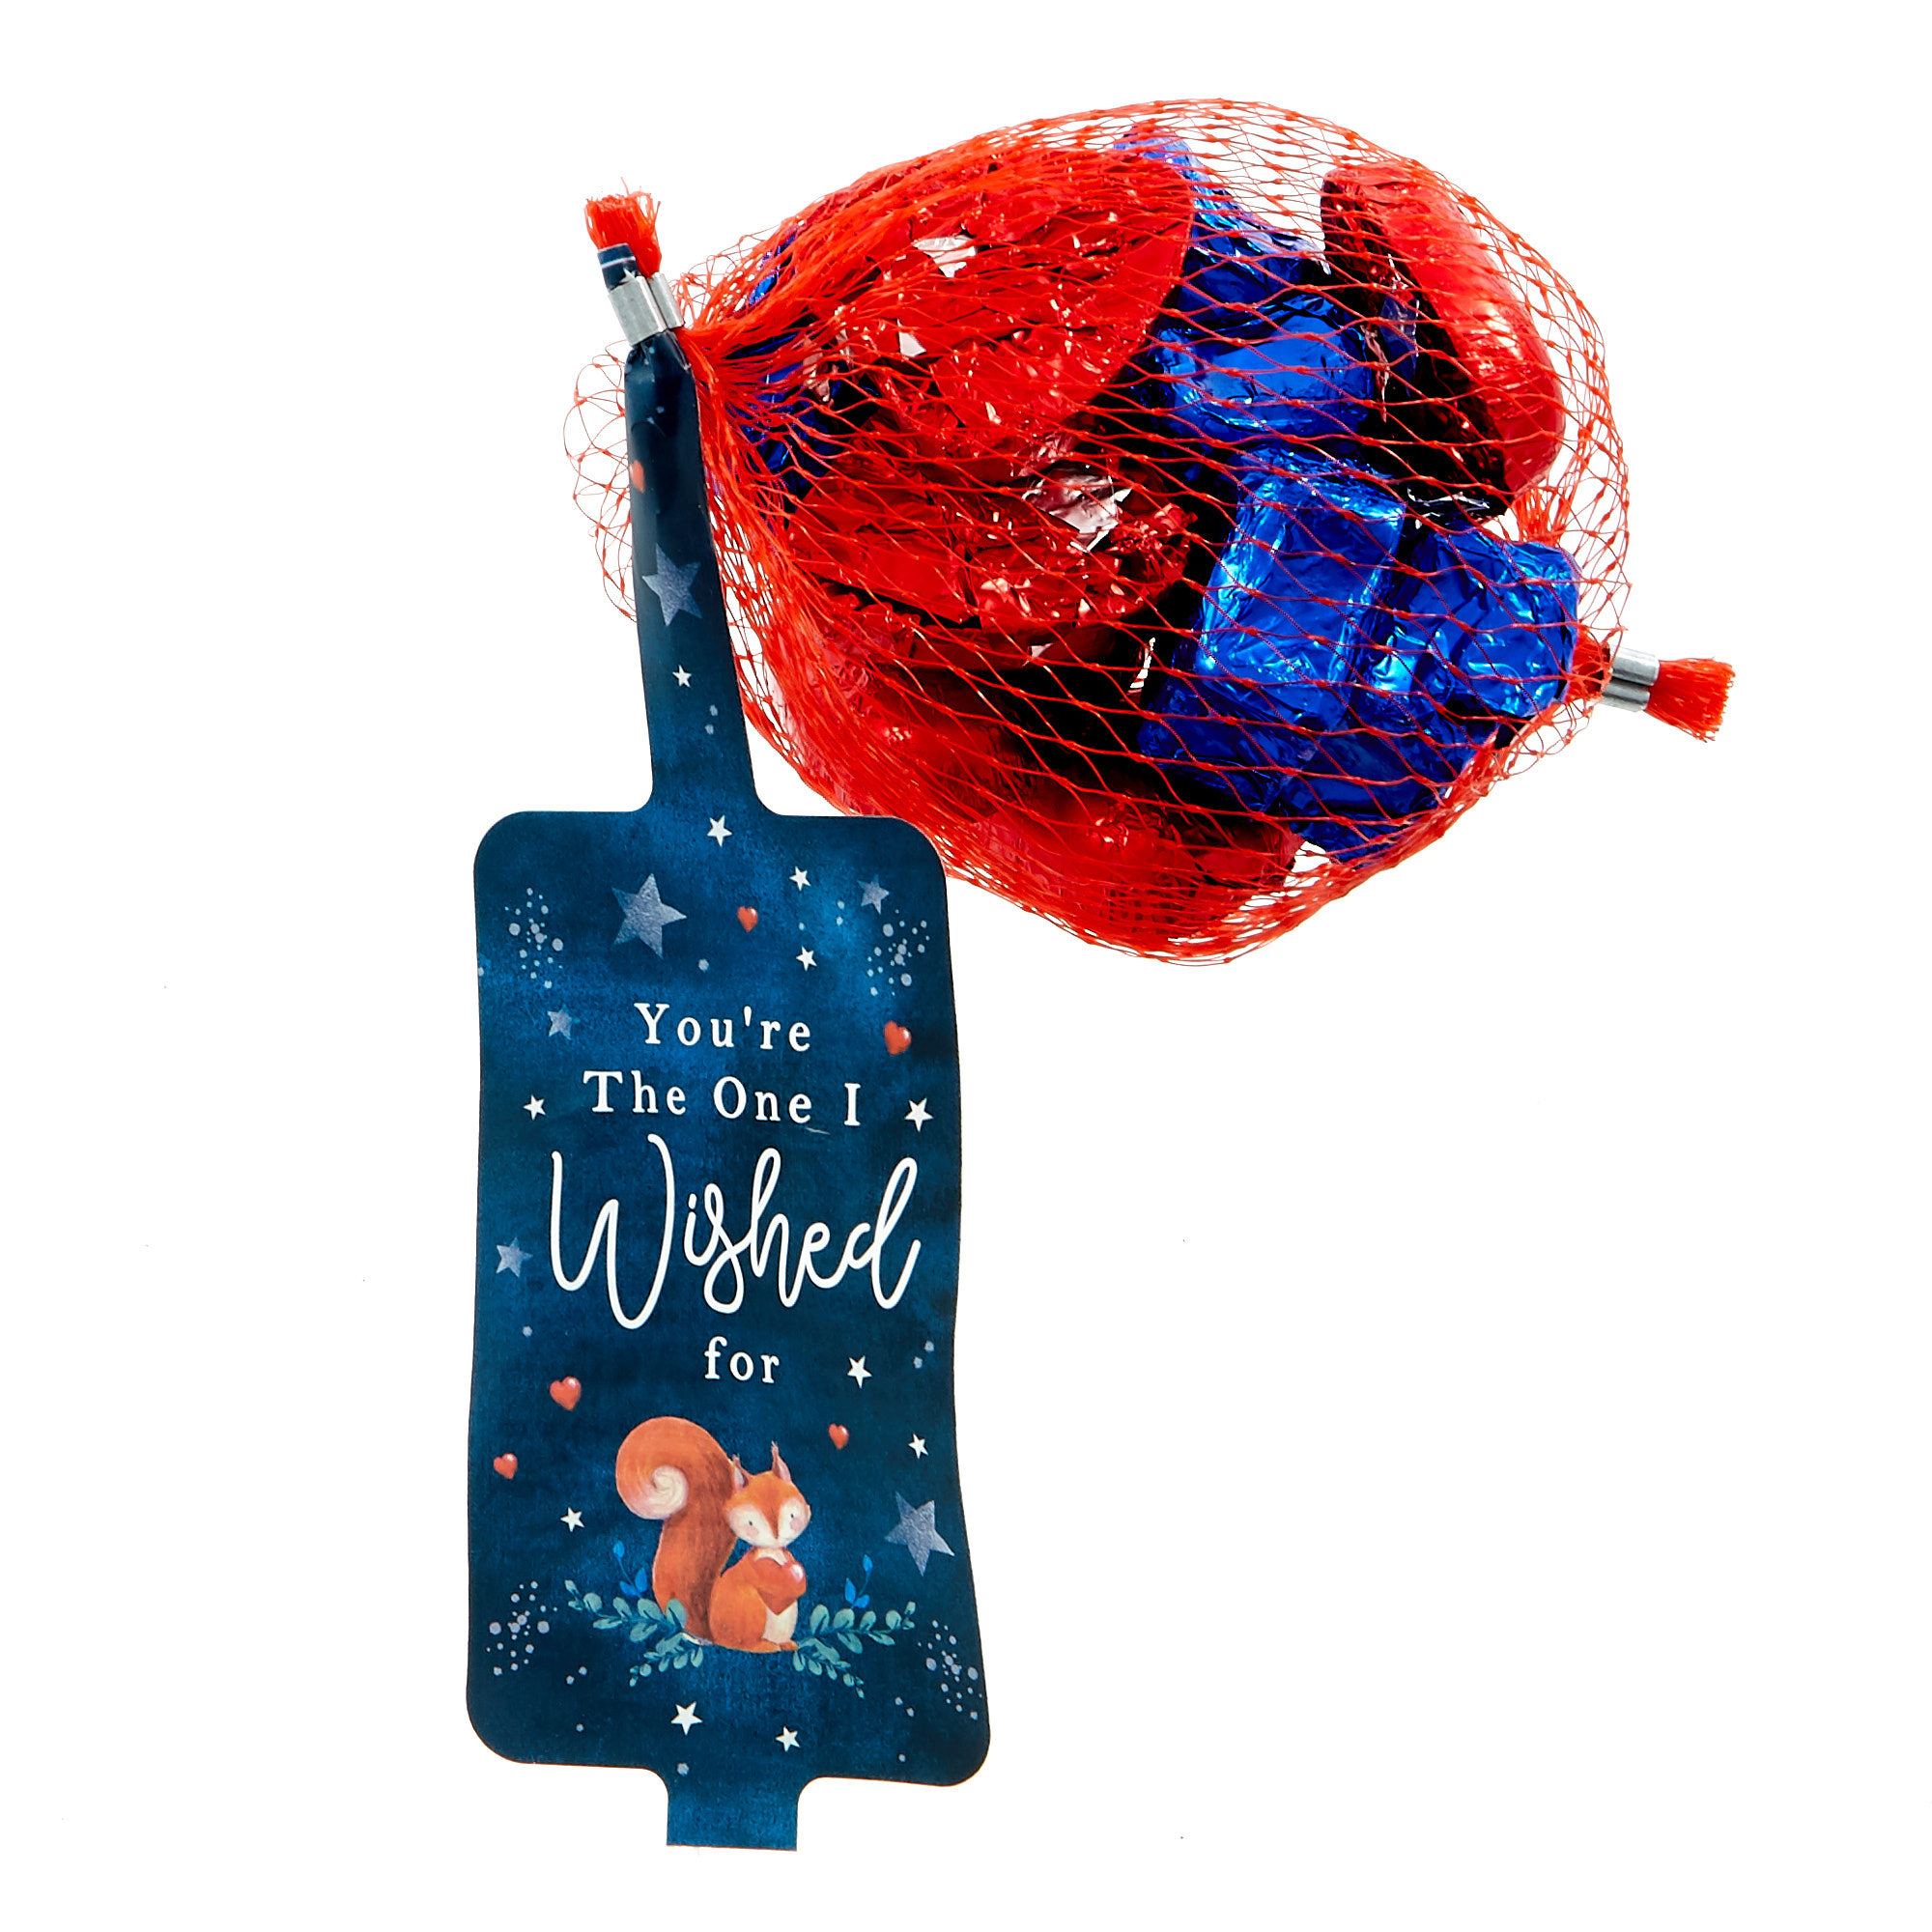 Hearts & Stars Chocolates In Nets - Pack Of 17